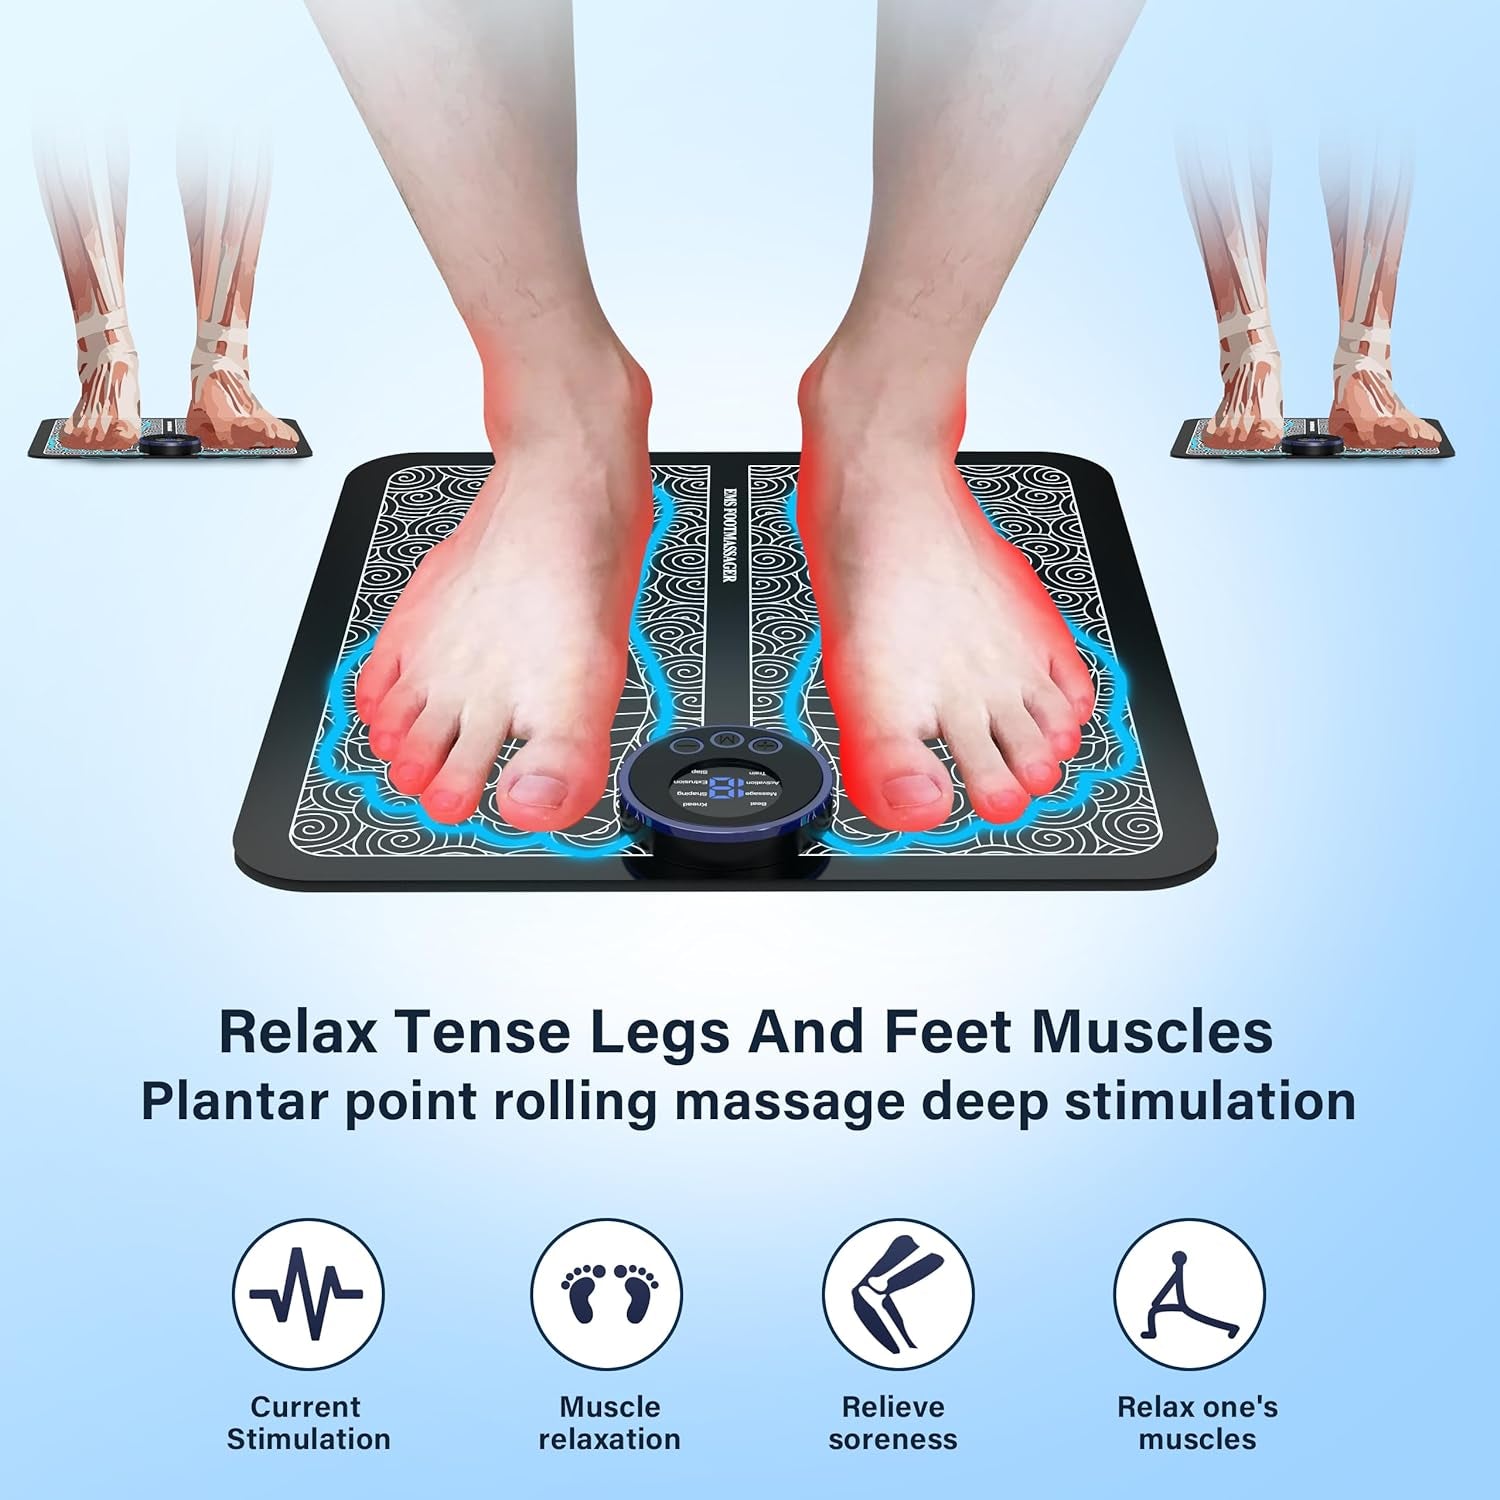 "Ultimate Foot Massager for Neuropathy - Remote Controlled for Circulation, Pain Relief, and Relaxation"